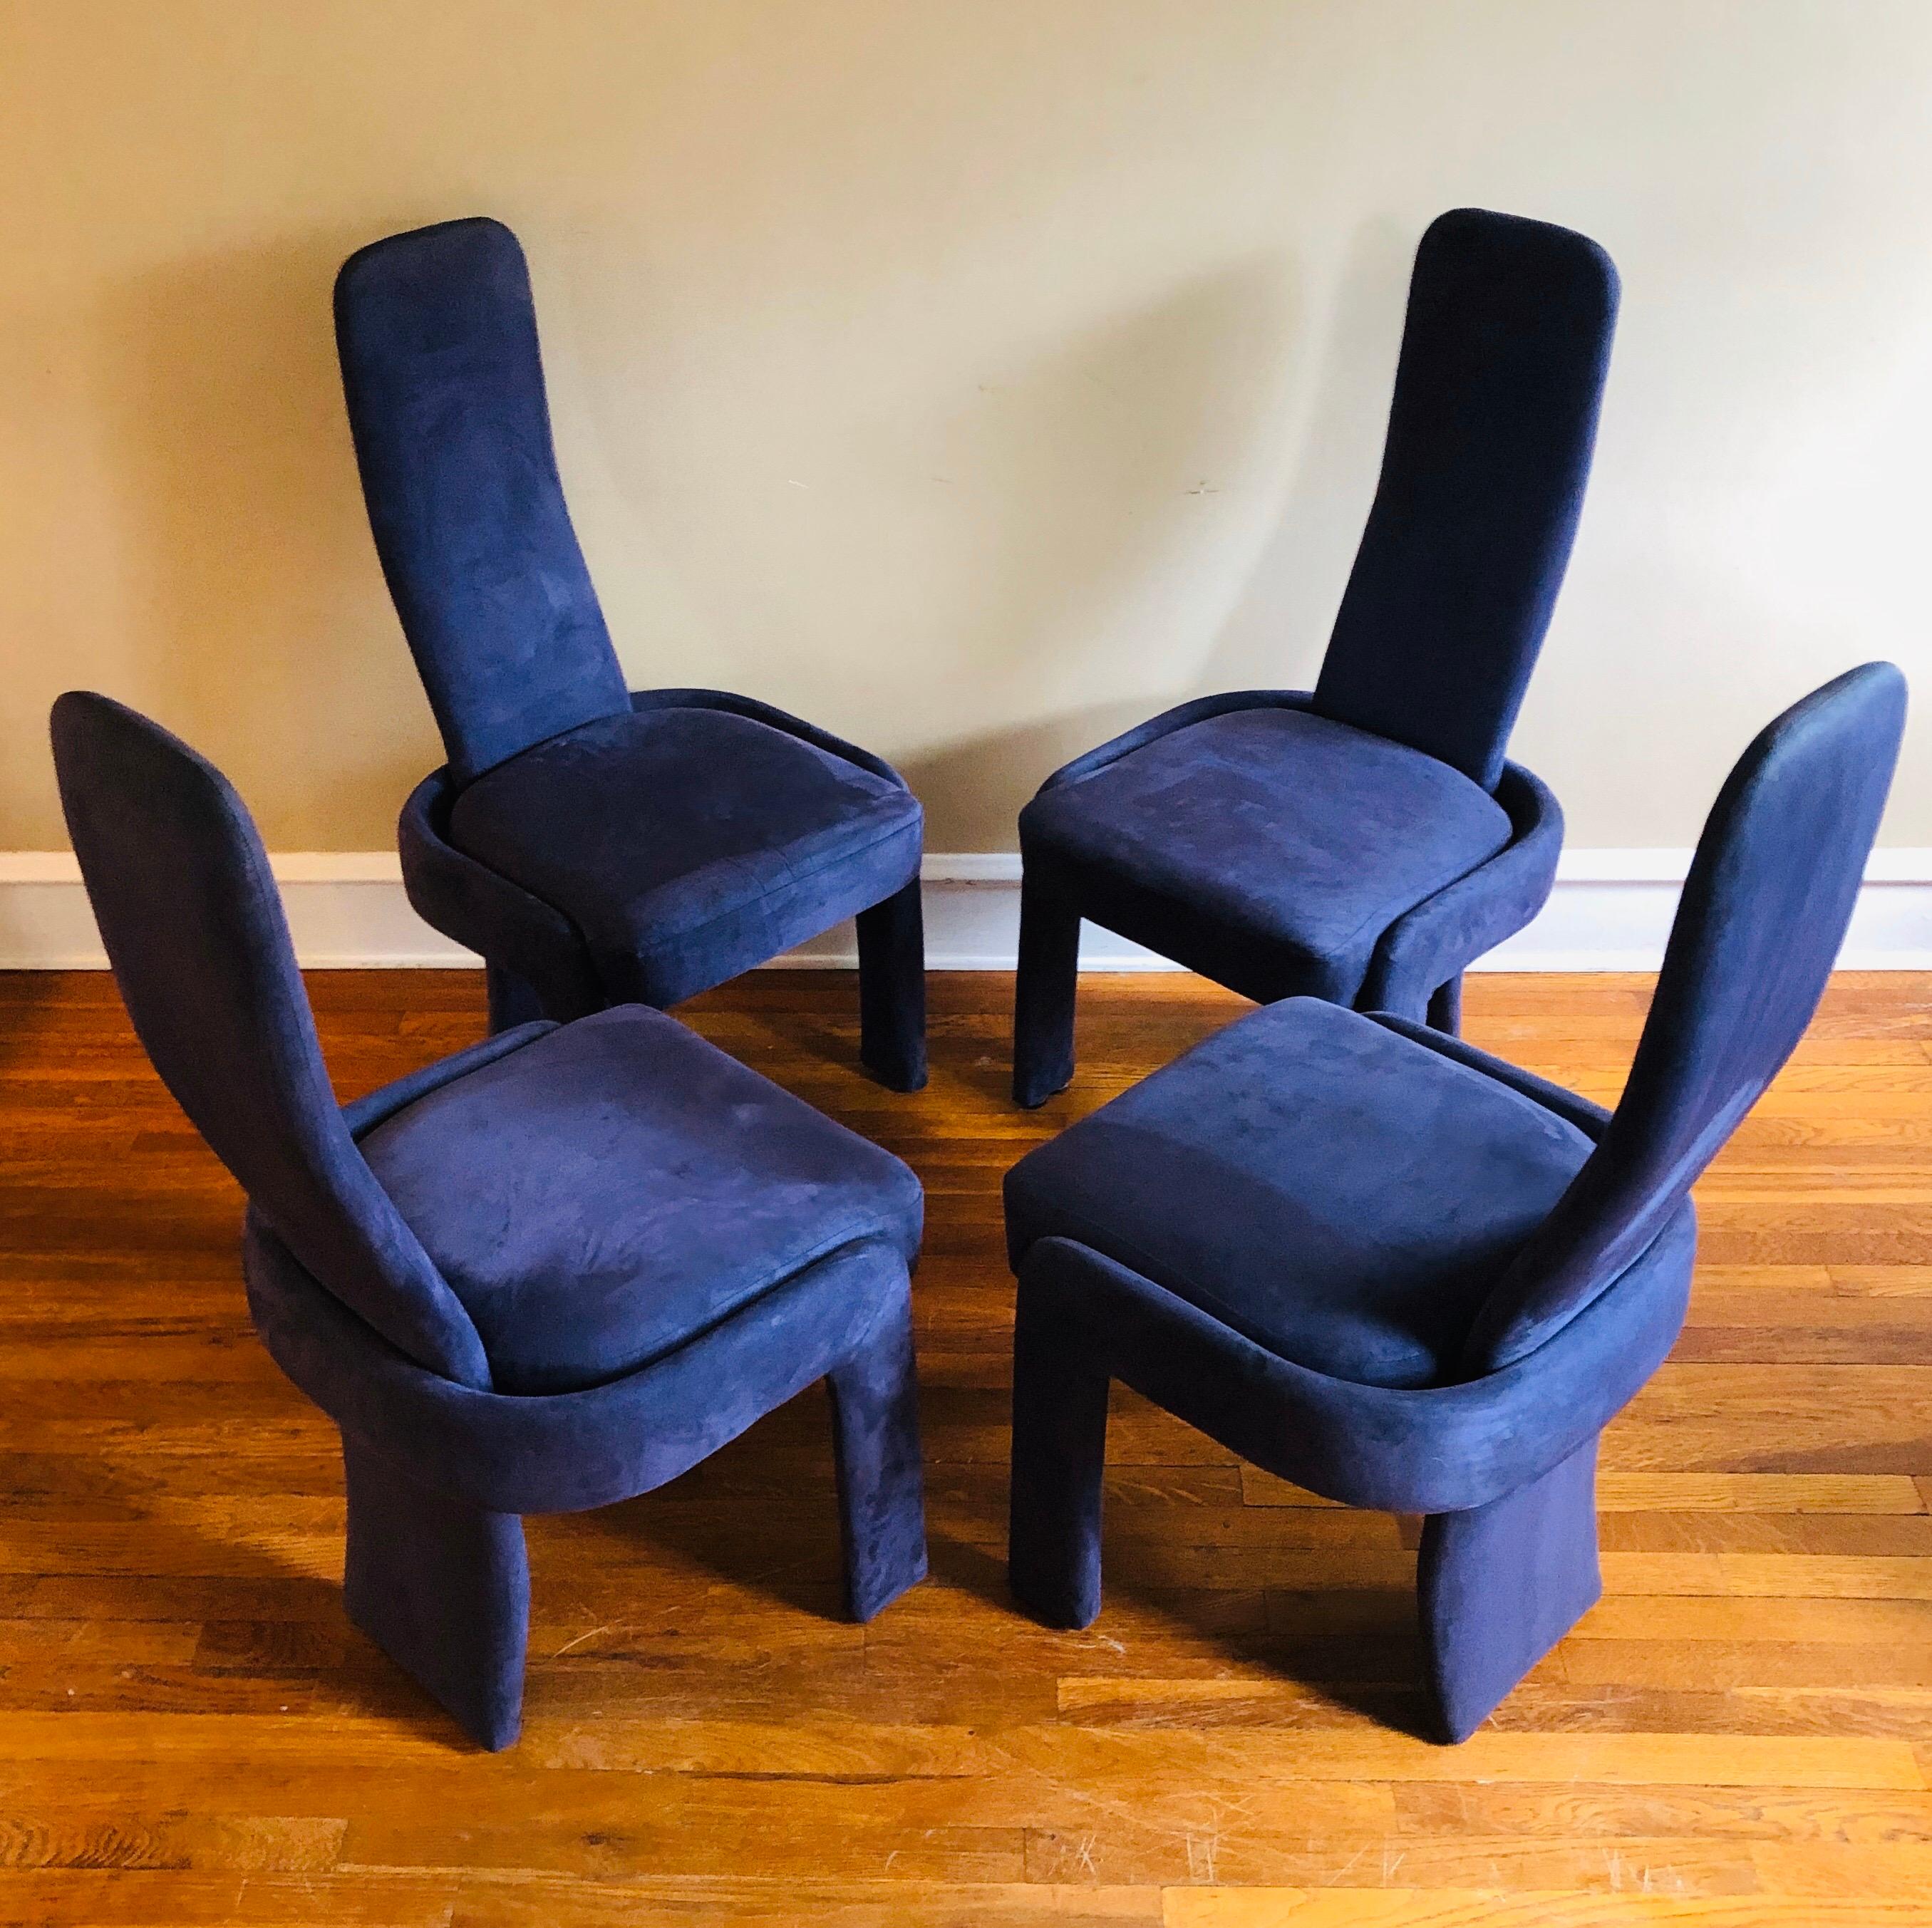 Late 20th Century Sculptural Postmodern Dining Chairs - Set of 6